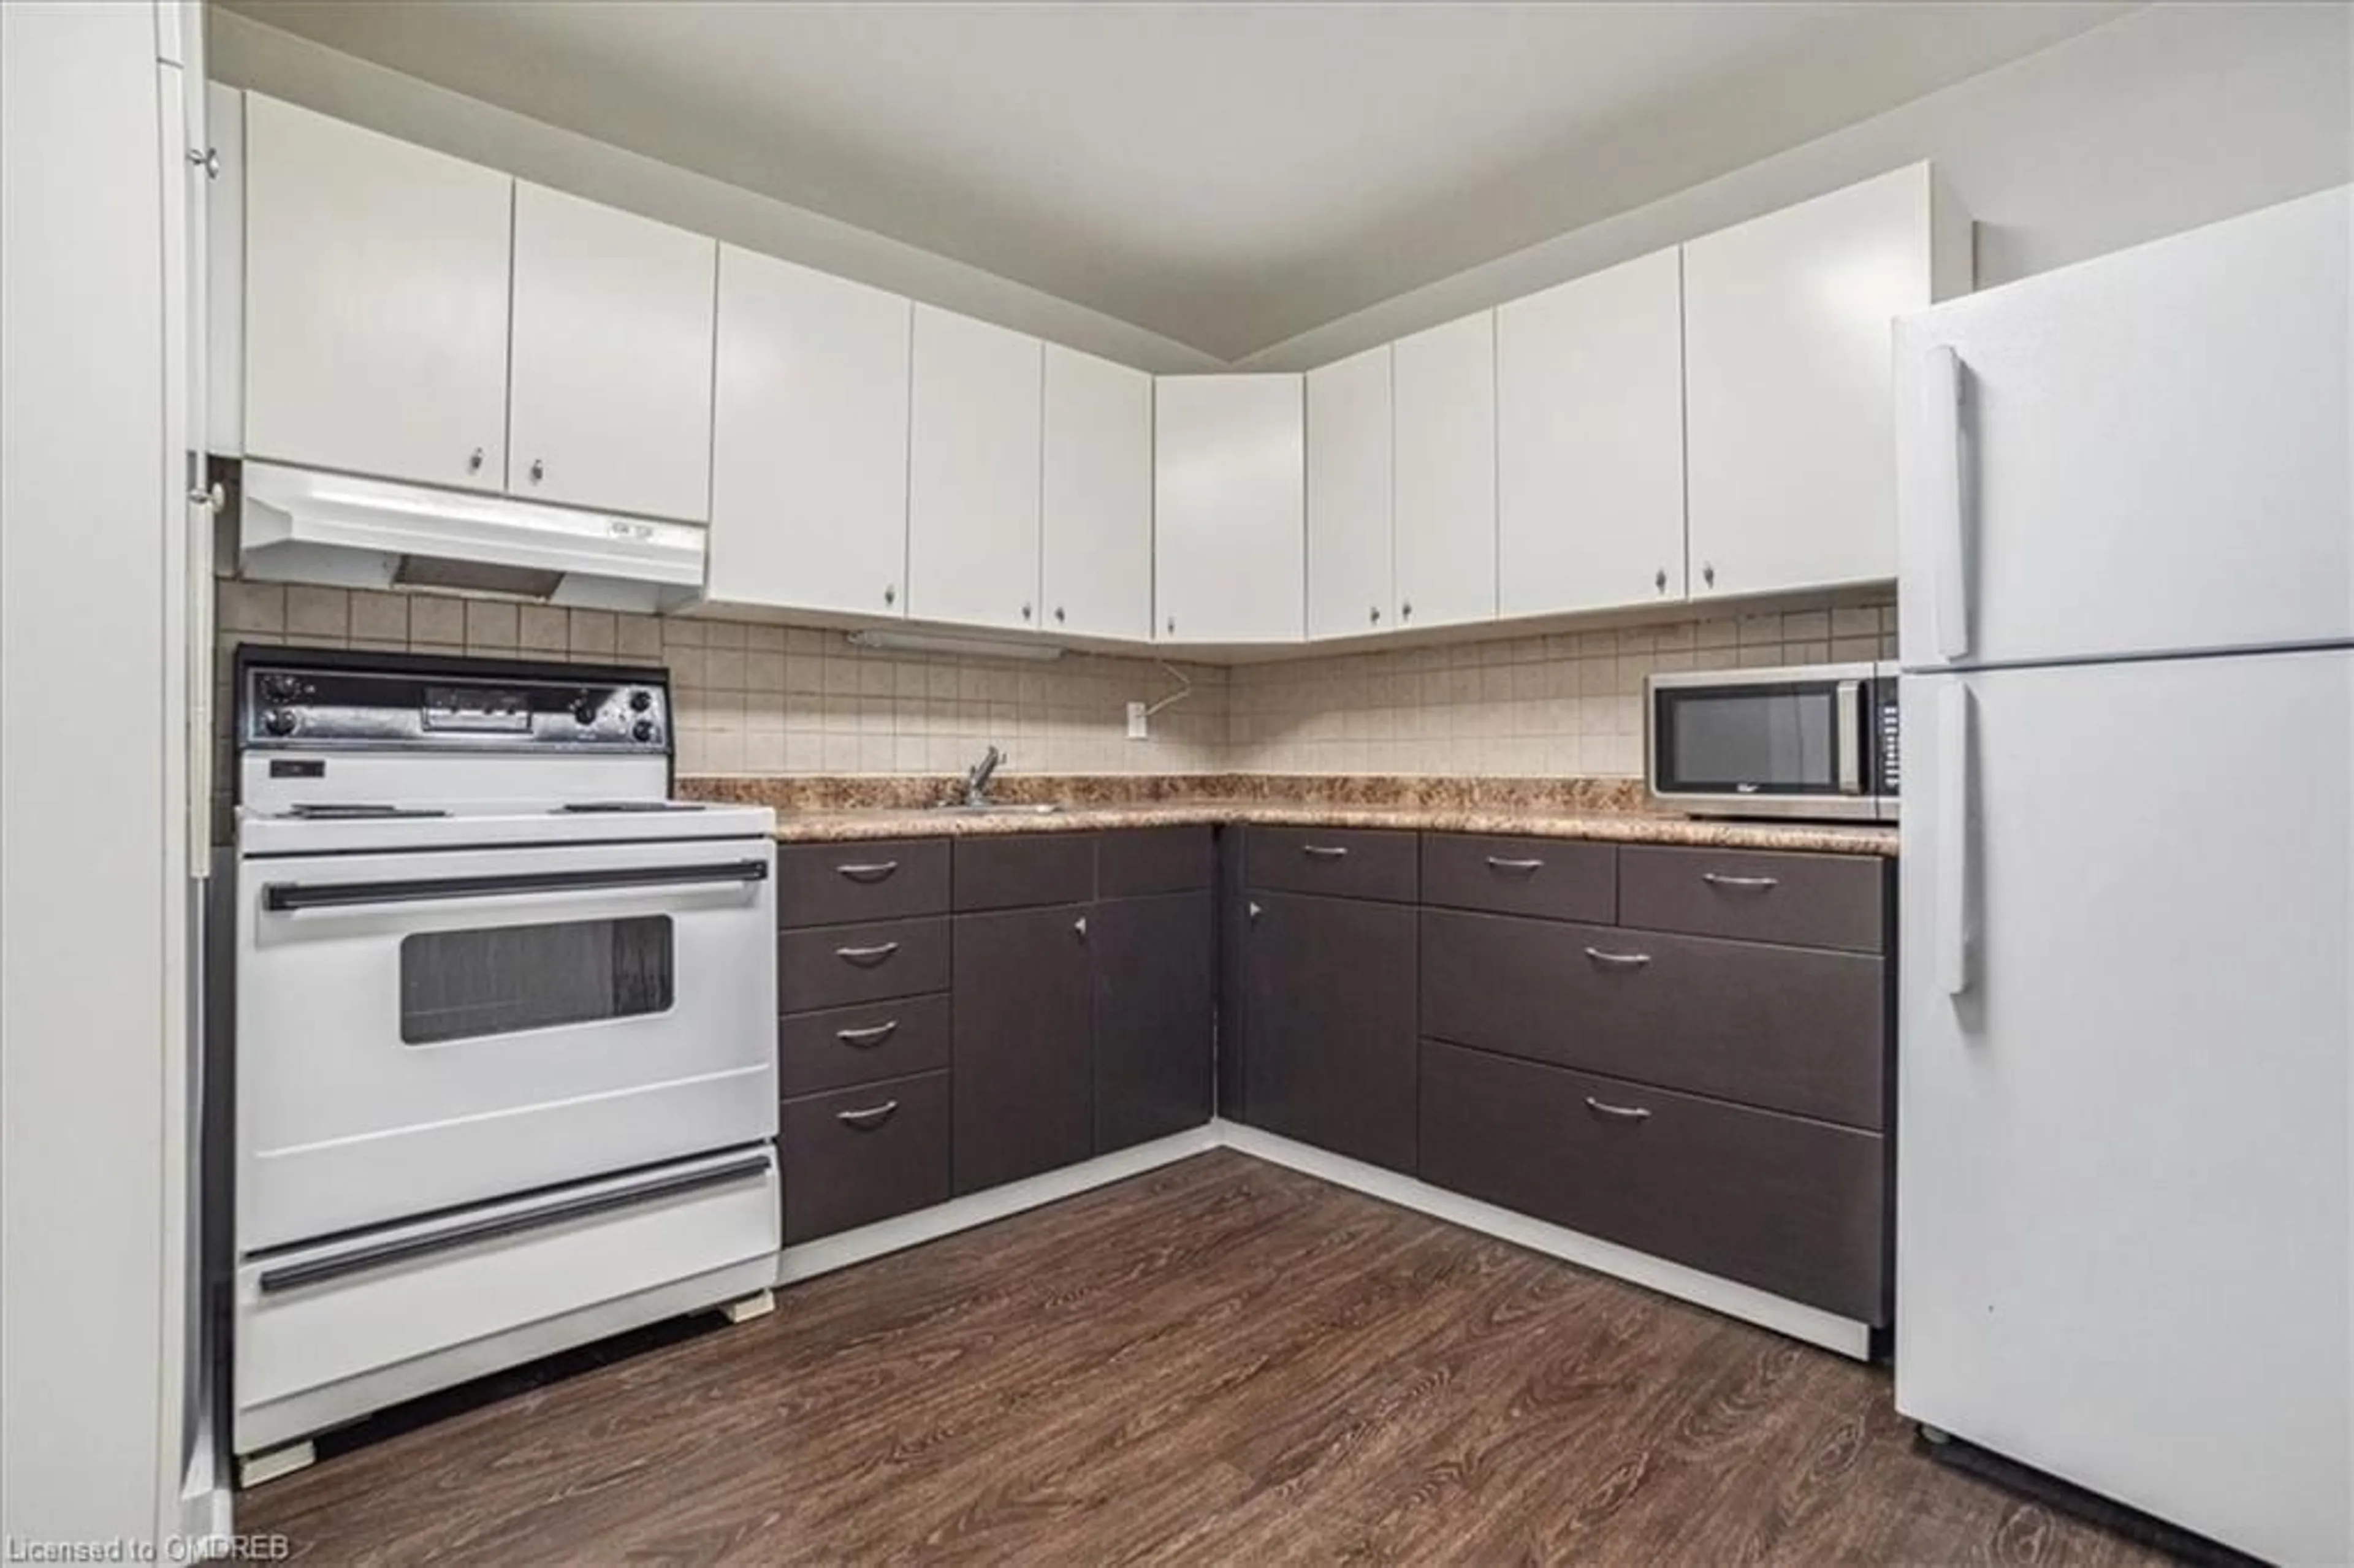 Standard kitchen for 2323 Confederation Pky #505, Mississauga Ontario L5B 1R6